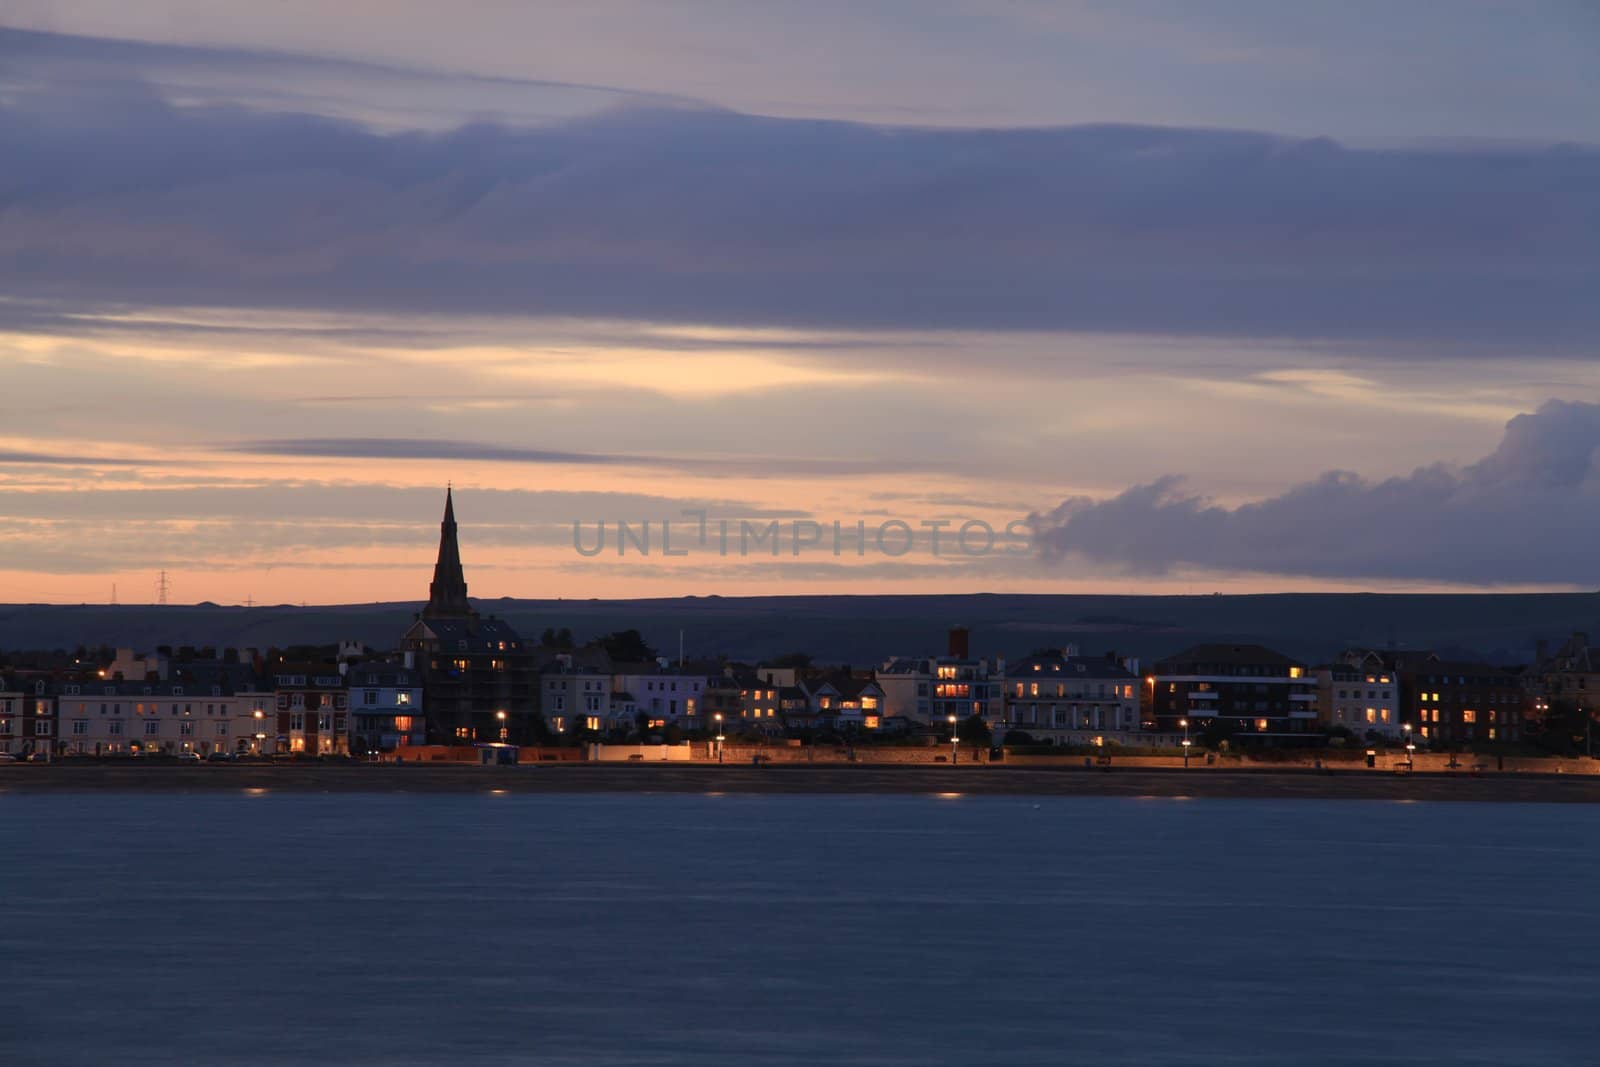 Dusk Weymouth seafront England by olliemt